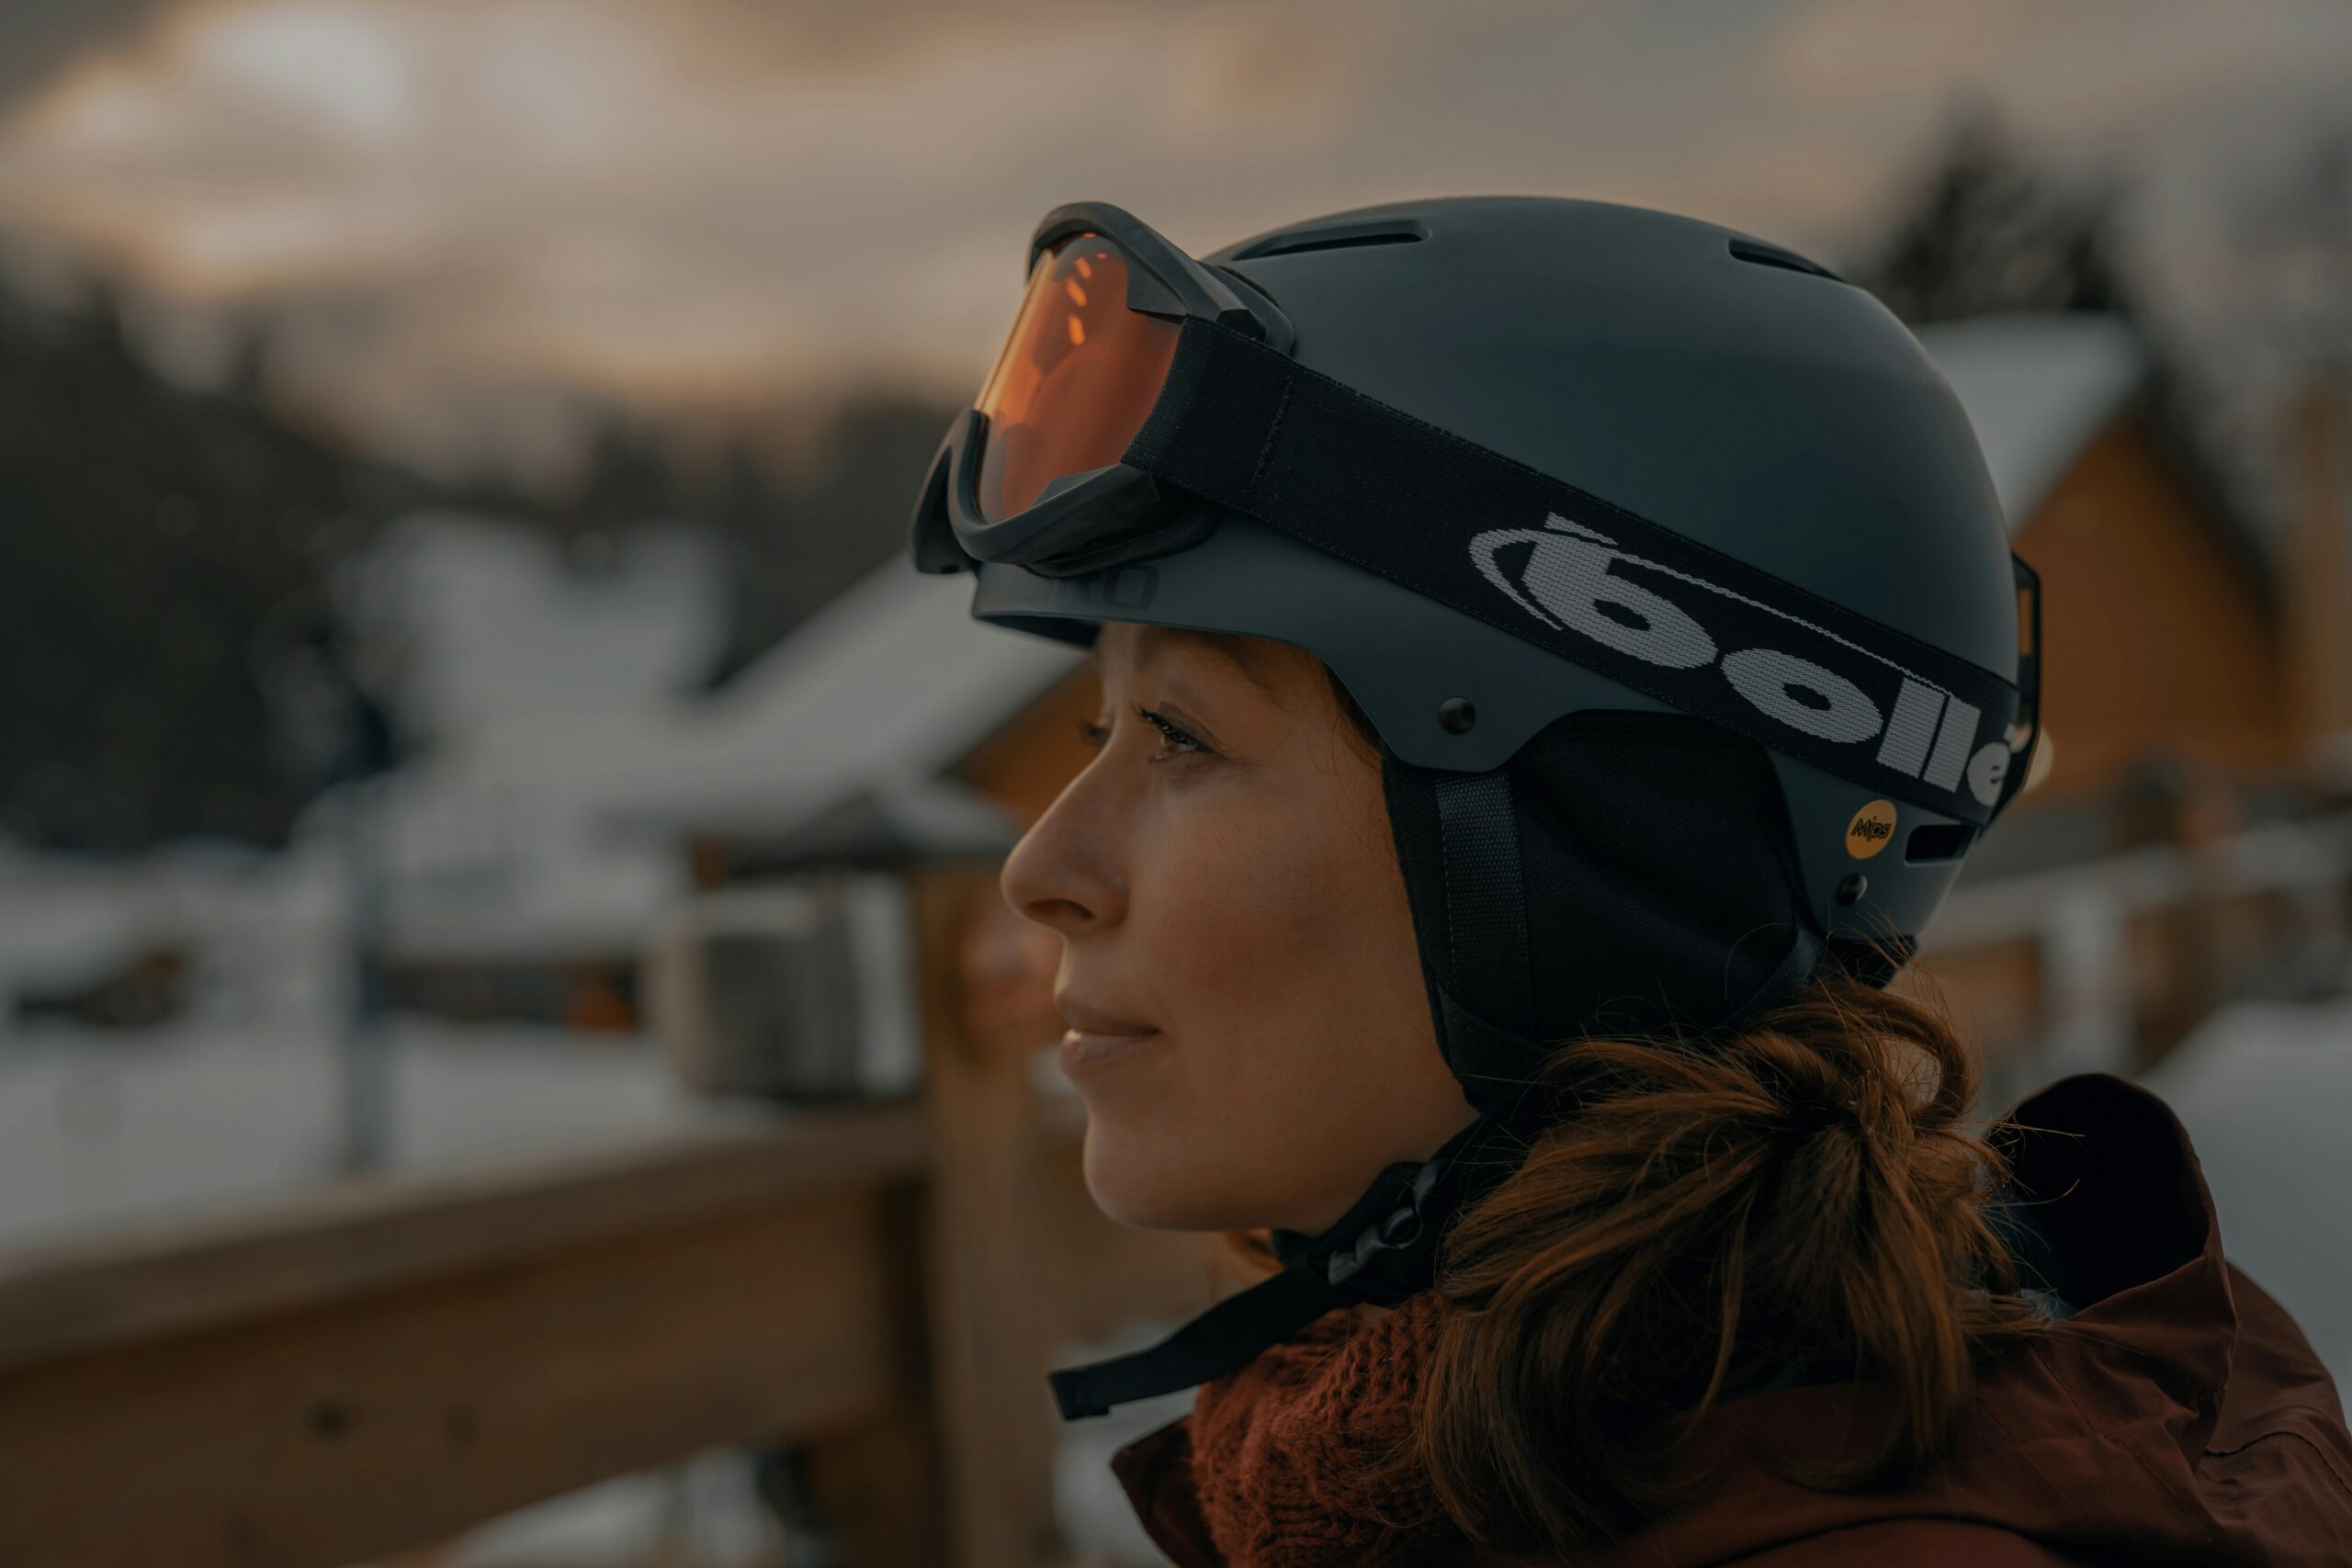 helmet, snowboarding, female, female snowboarder, snowboard, snowboarder, protective gear, HD grey wallpapers, apparel, clothing, crash helmet, human, people images & pictures, public domain image